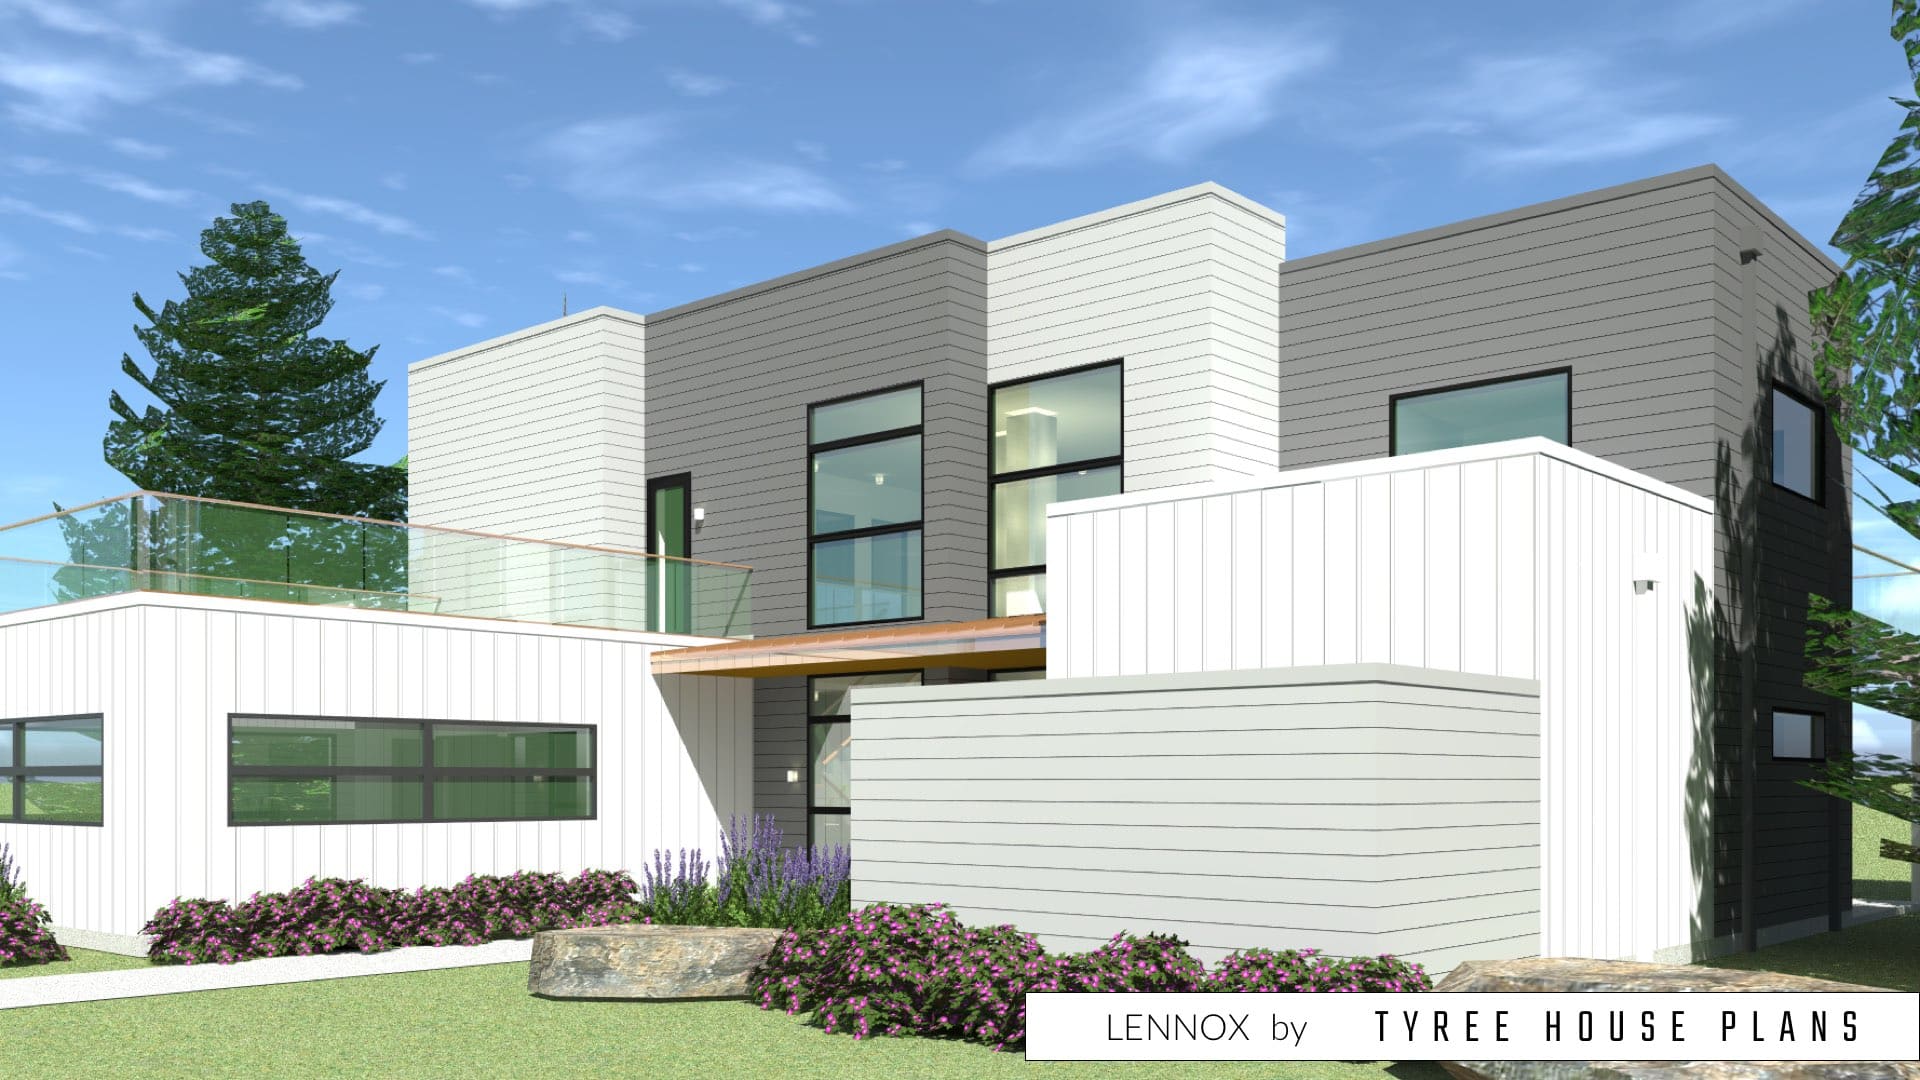 Front right view with private garden. Lennox by Tyree House Plans